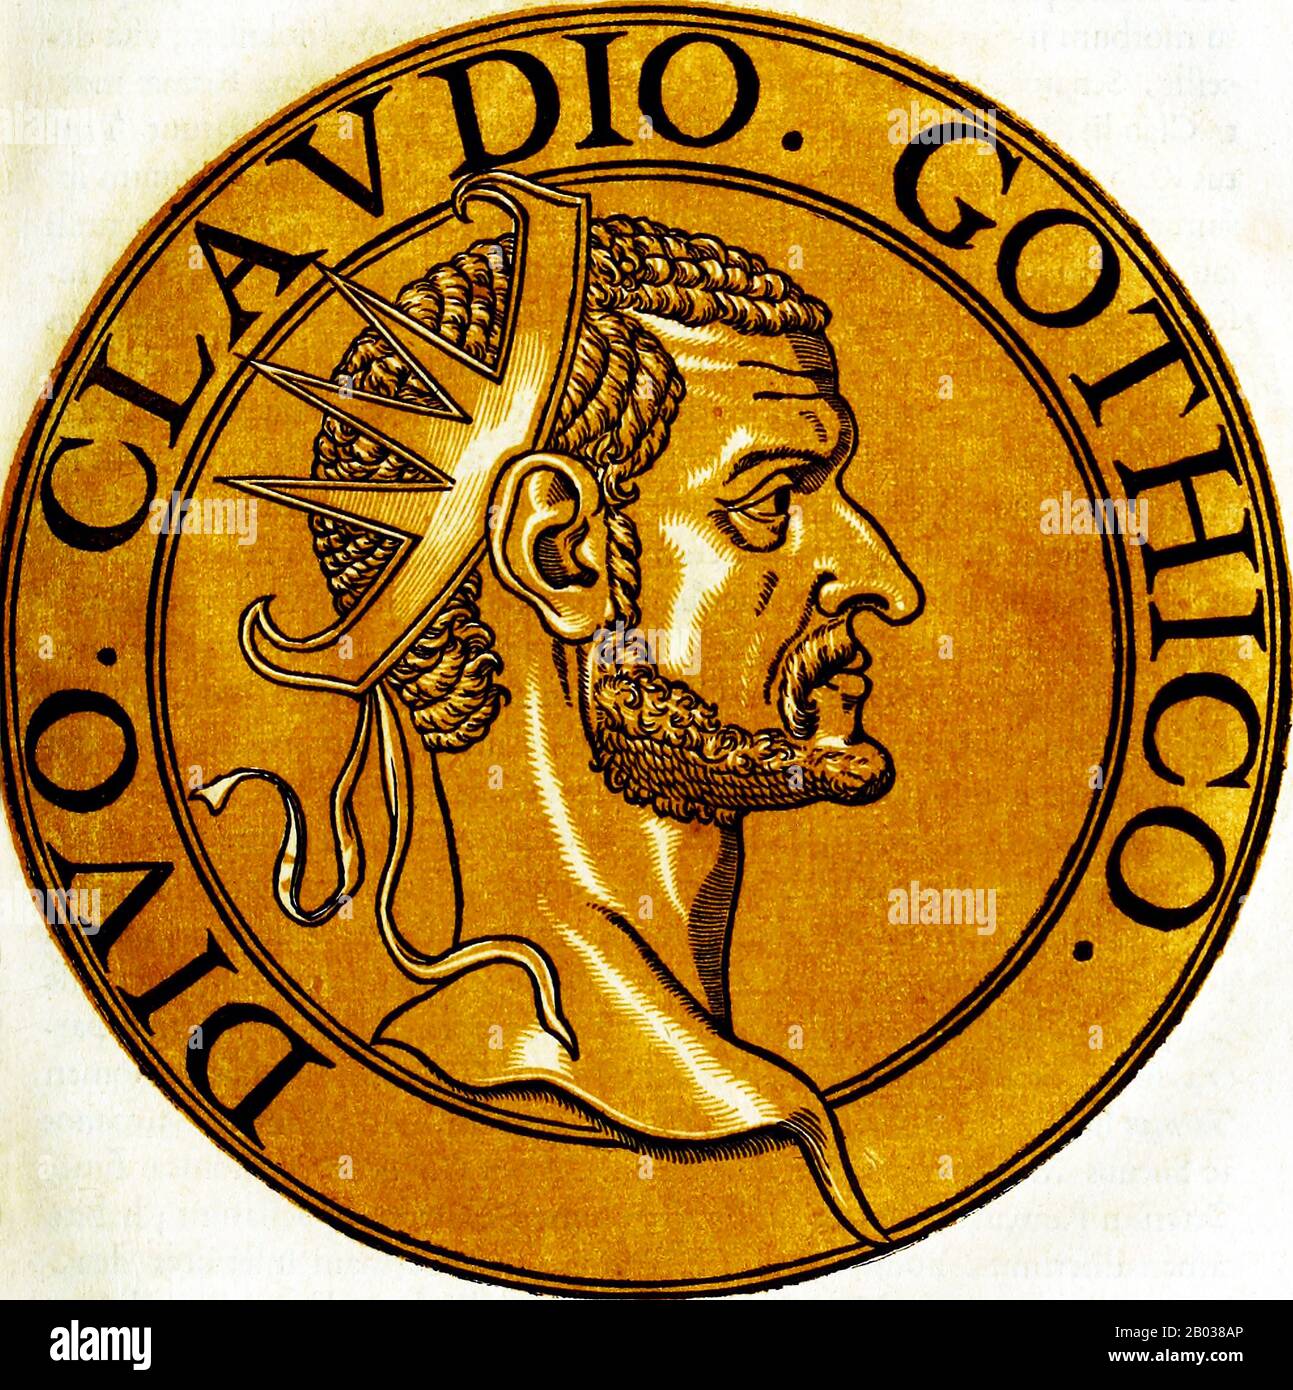 Claudius II (210-270), also known as Claudius Gothicus, was of Illyrian origin and barbarian birth. He was a career soldier, having served his entire adult life in the Roman army. He was a military tribune in Emperor Gallienus' army during the siege of Milan in 268 when Gallienus was murdered by his own ofifcials, possibly including Claudius. Claudius was then proclaimed emperor by his own soldiers, possibly because of his physical strength and cruelty.  Claudius, like the previous barbarian emperor Maximinus Thrax, was a soldier-emperor, the first in a series that would restore the Empire fro Stock Photo